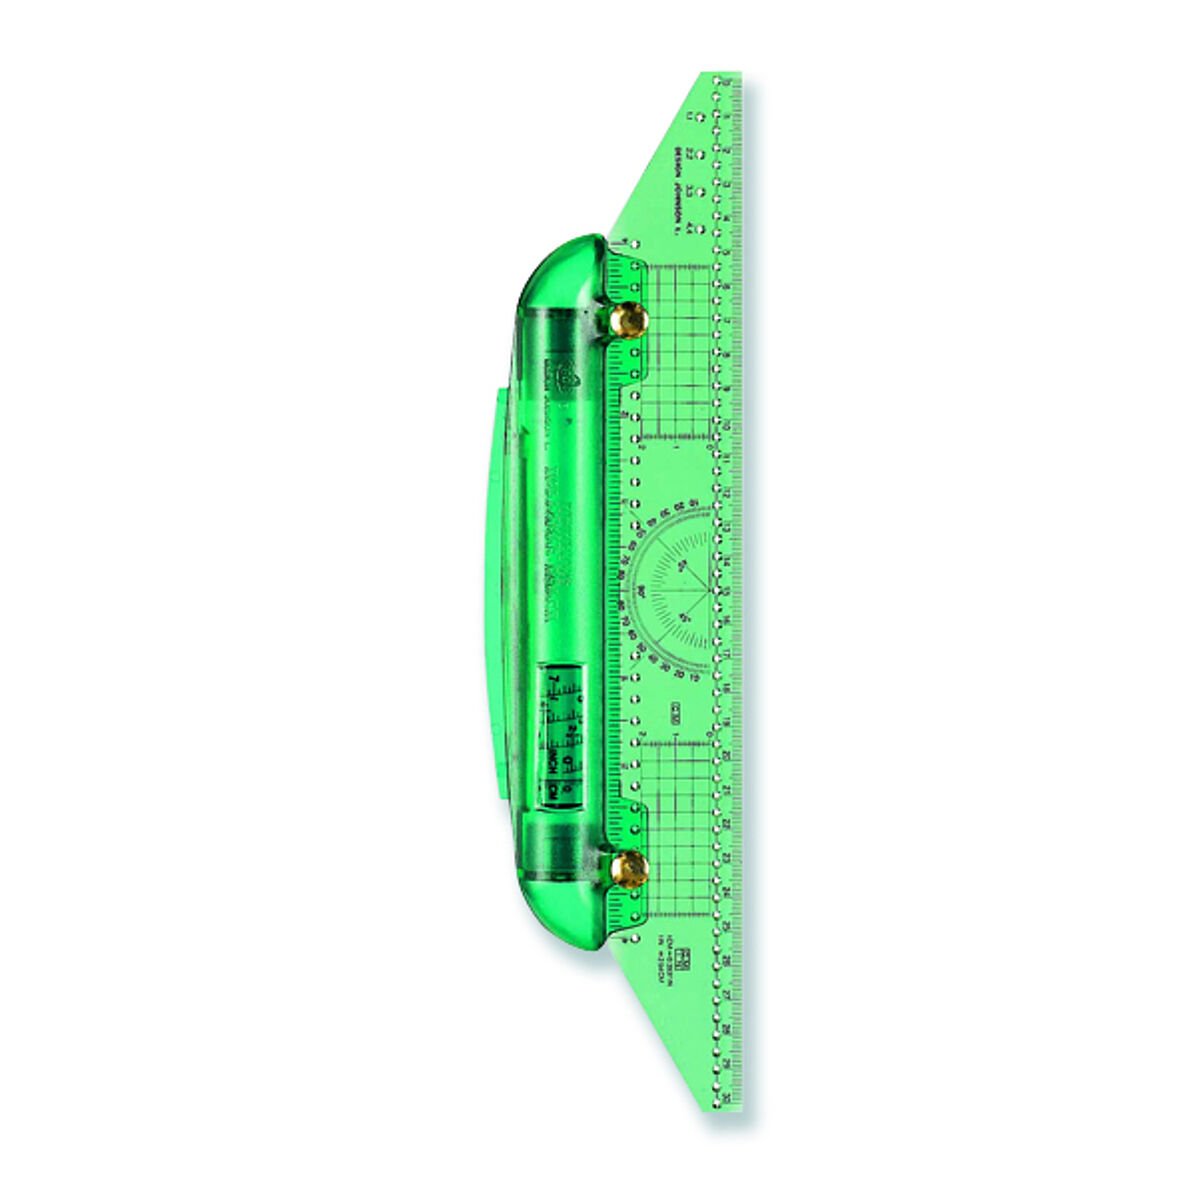 12 Parallel Rolling Ruler / Glider (Out of Stock)